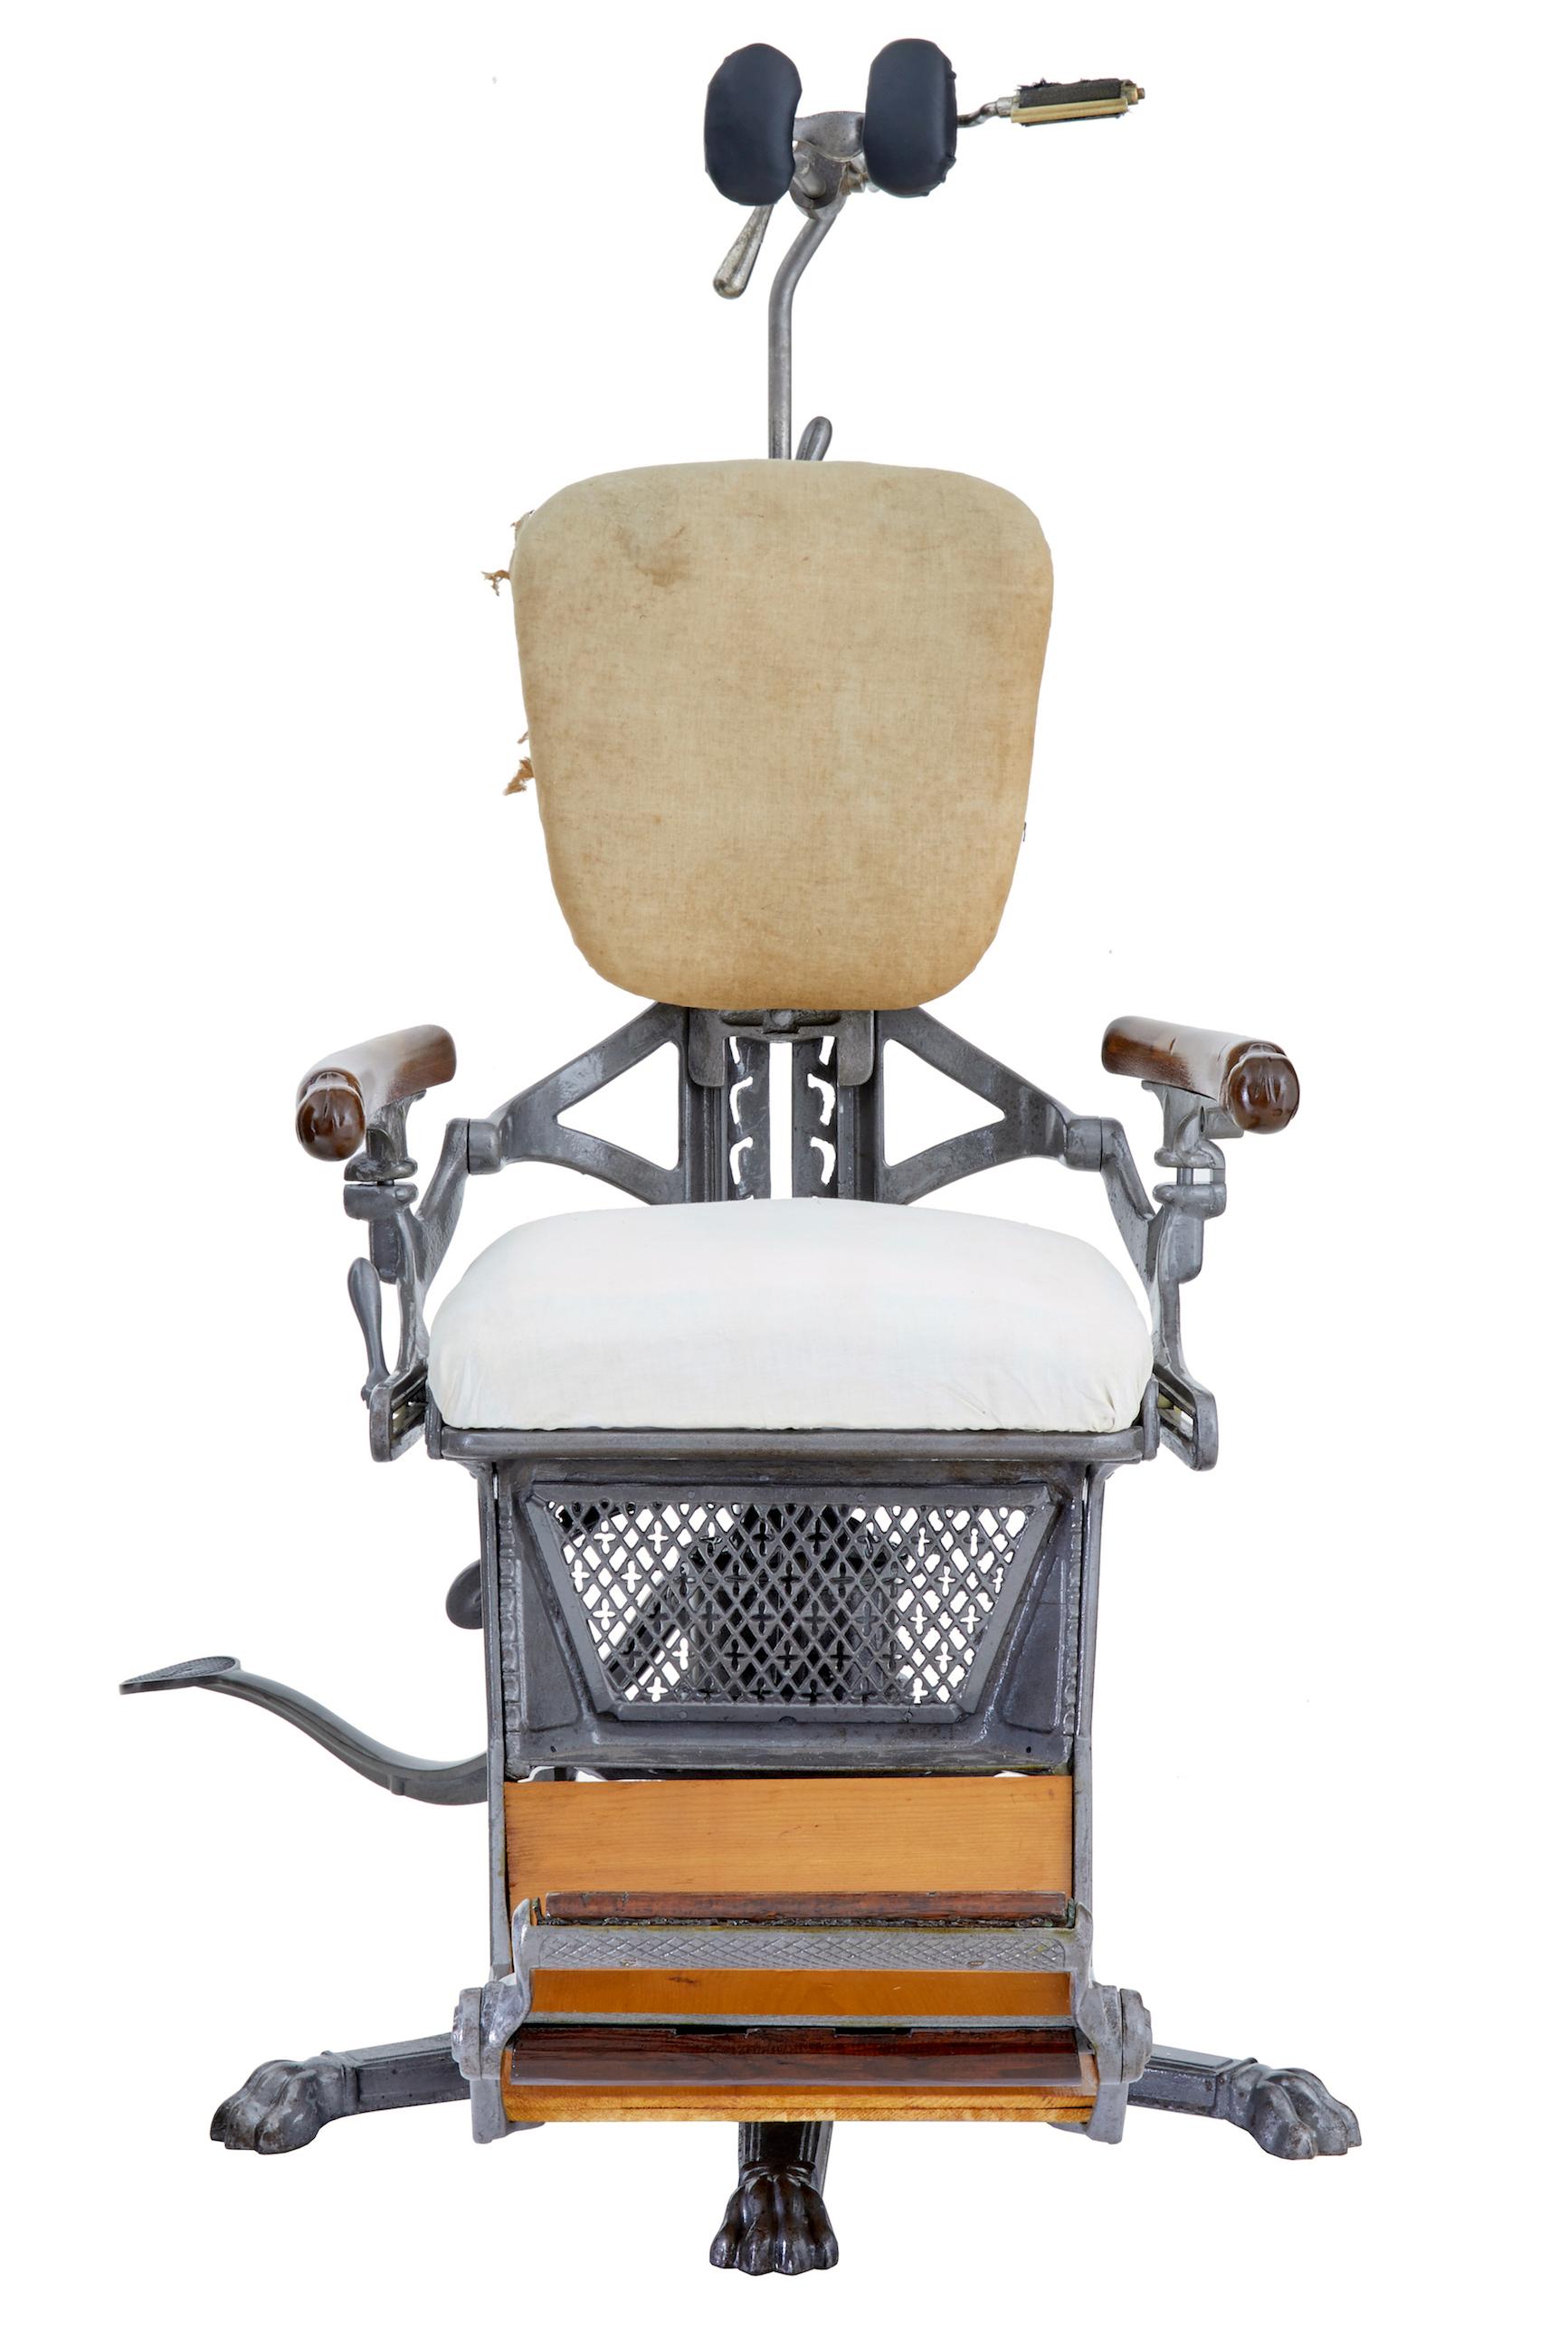 19th century American decorative cast iron dentist chair For Sale 2